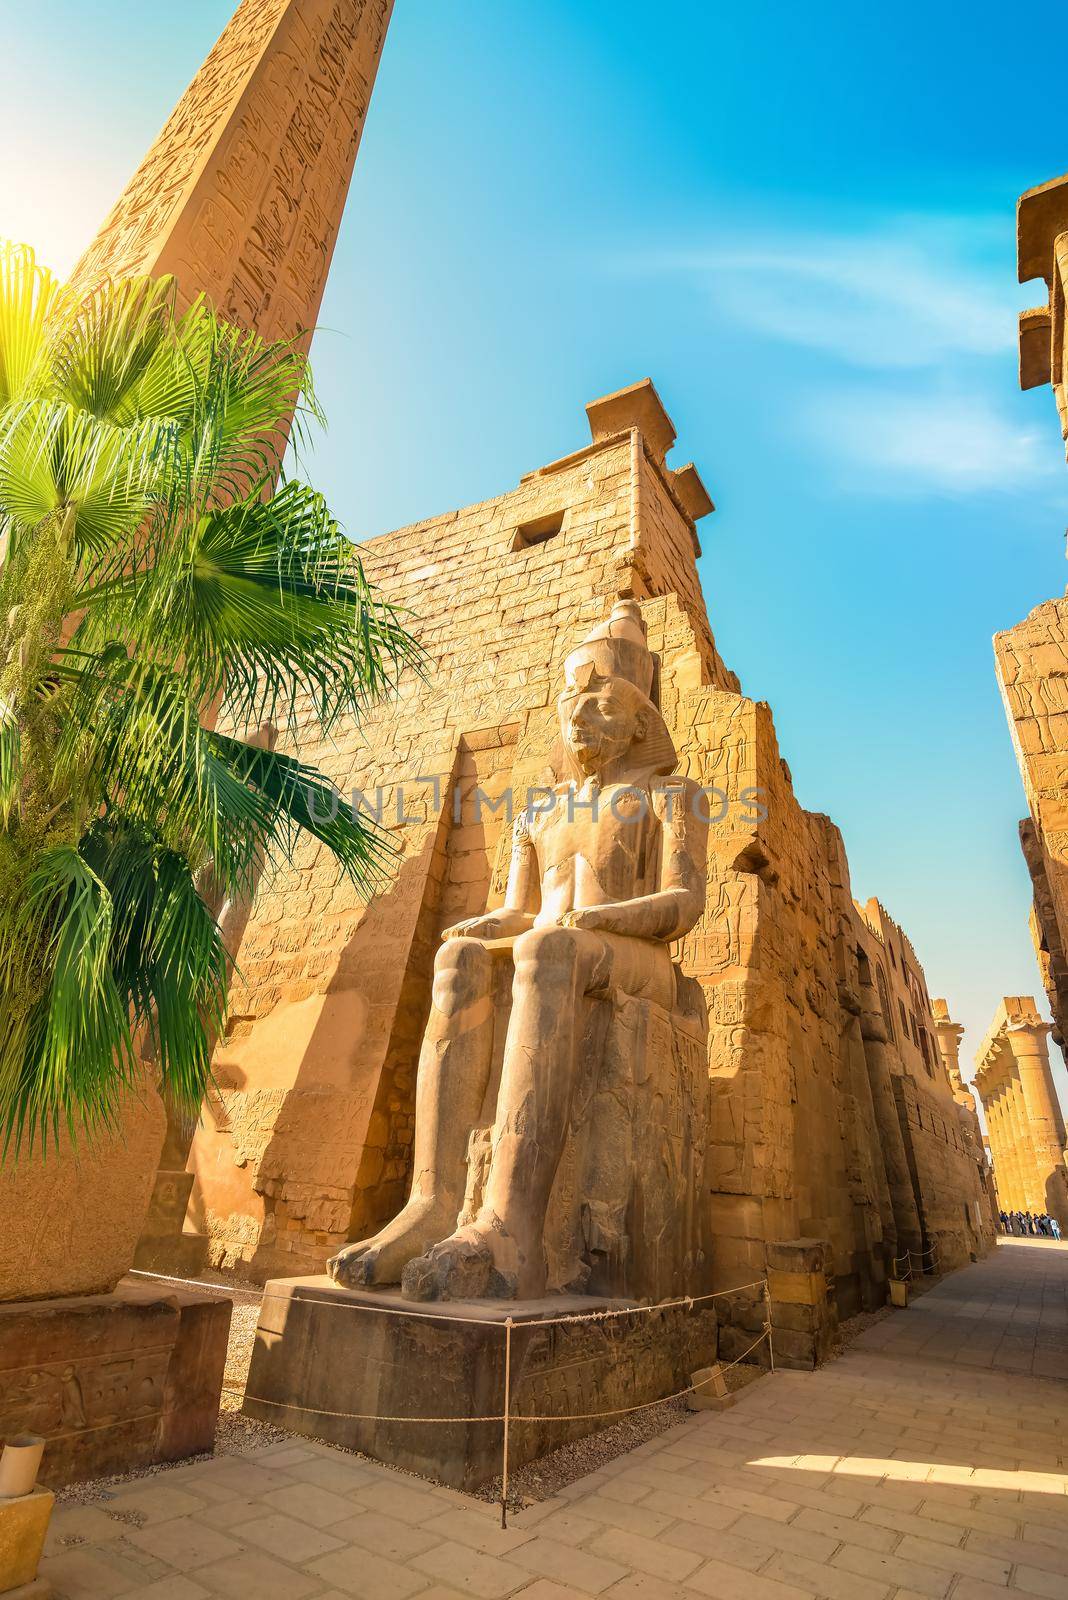 luxor temple and palm by Givaga